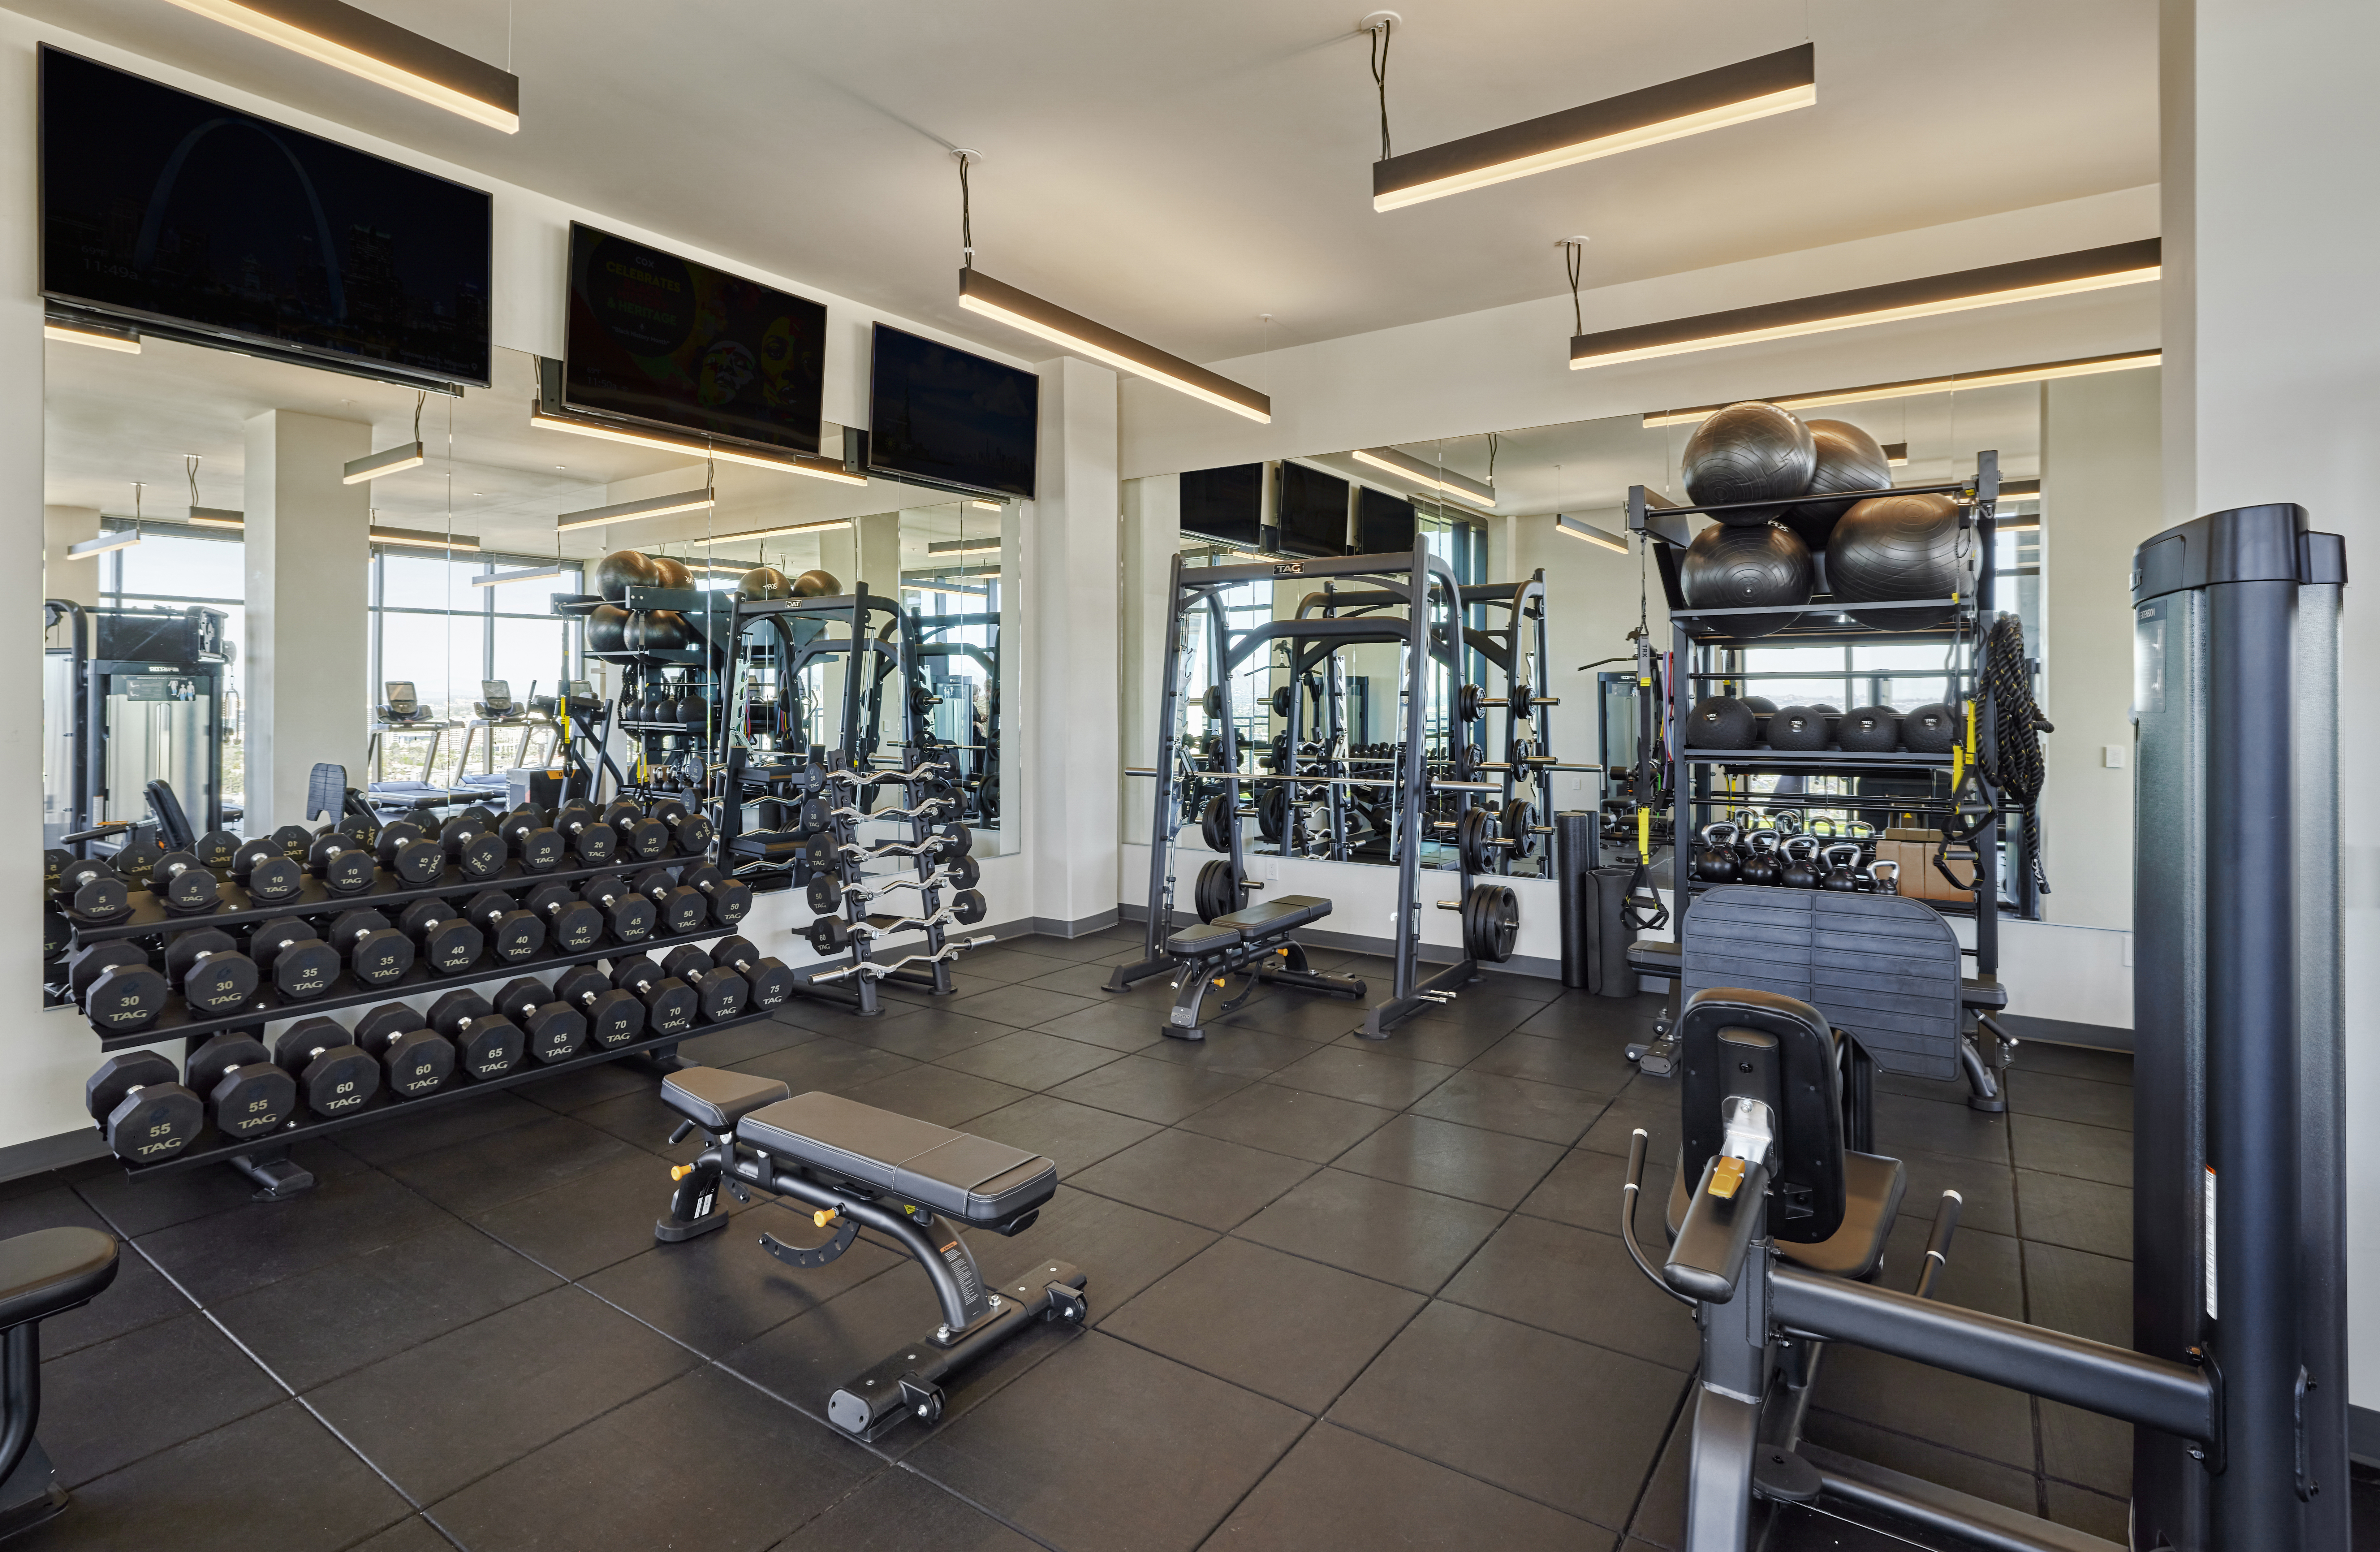 Weights section in fitness center